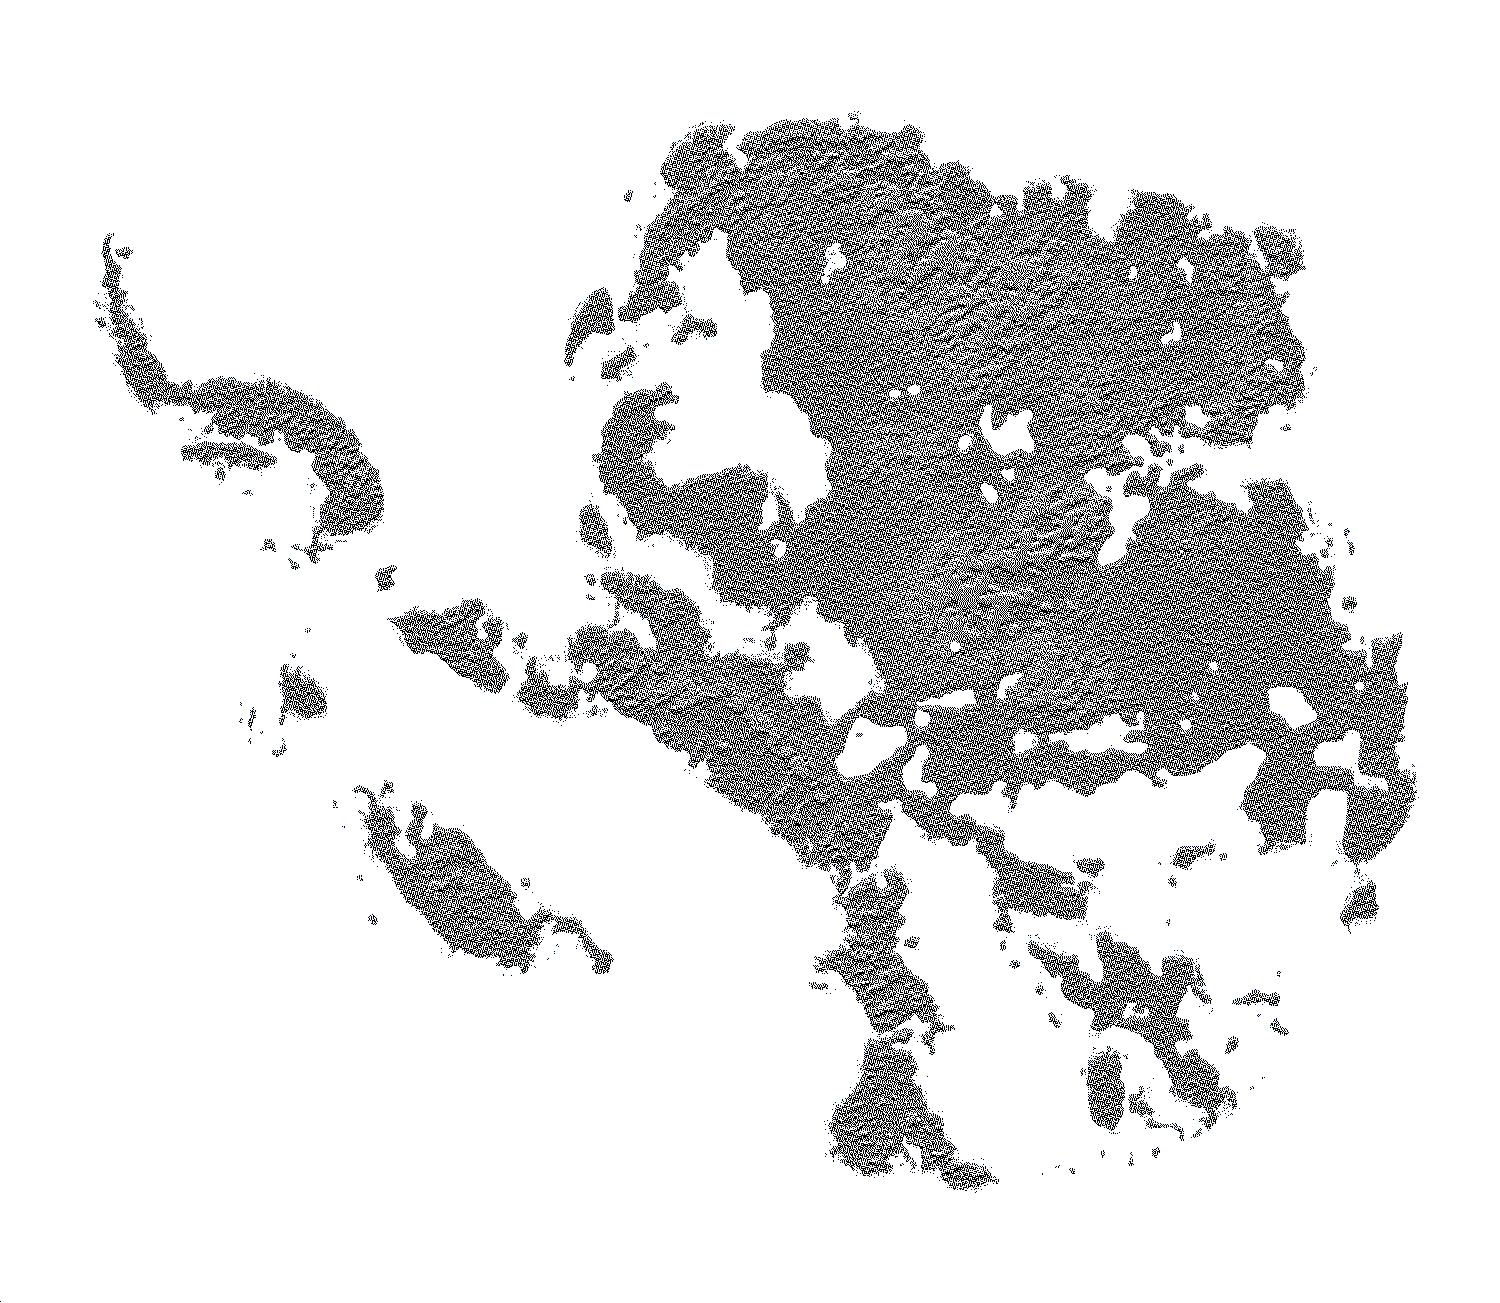 A black and white 1-bit pixel dither illustration of the continent of Antarctica